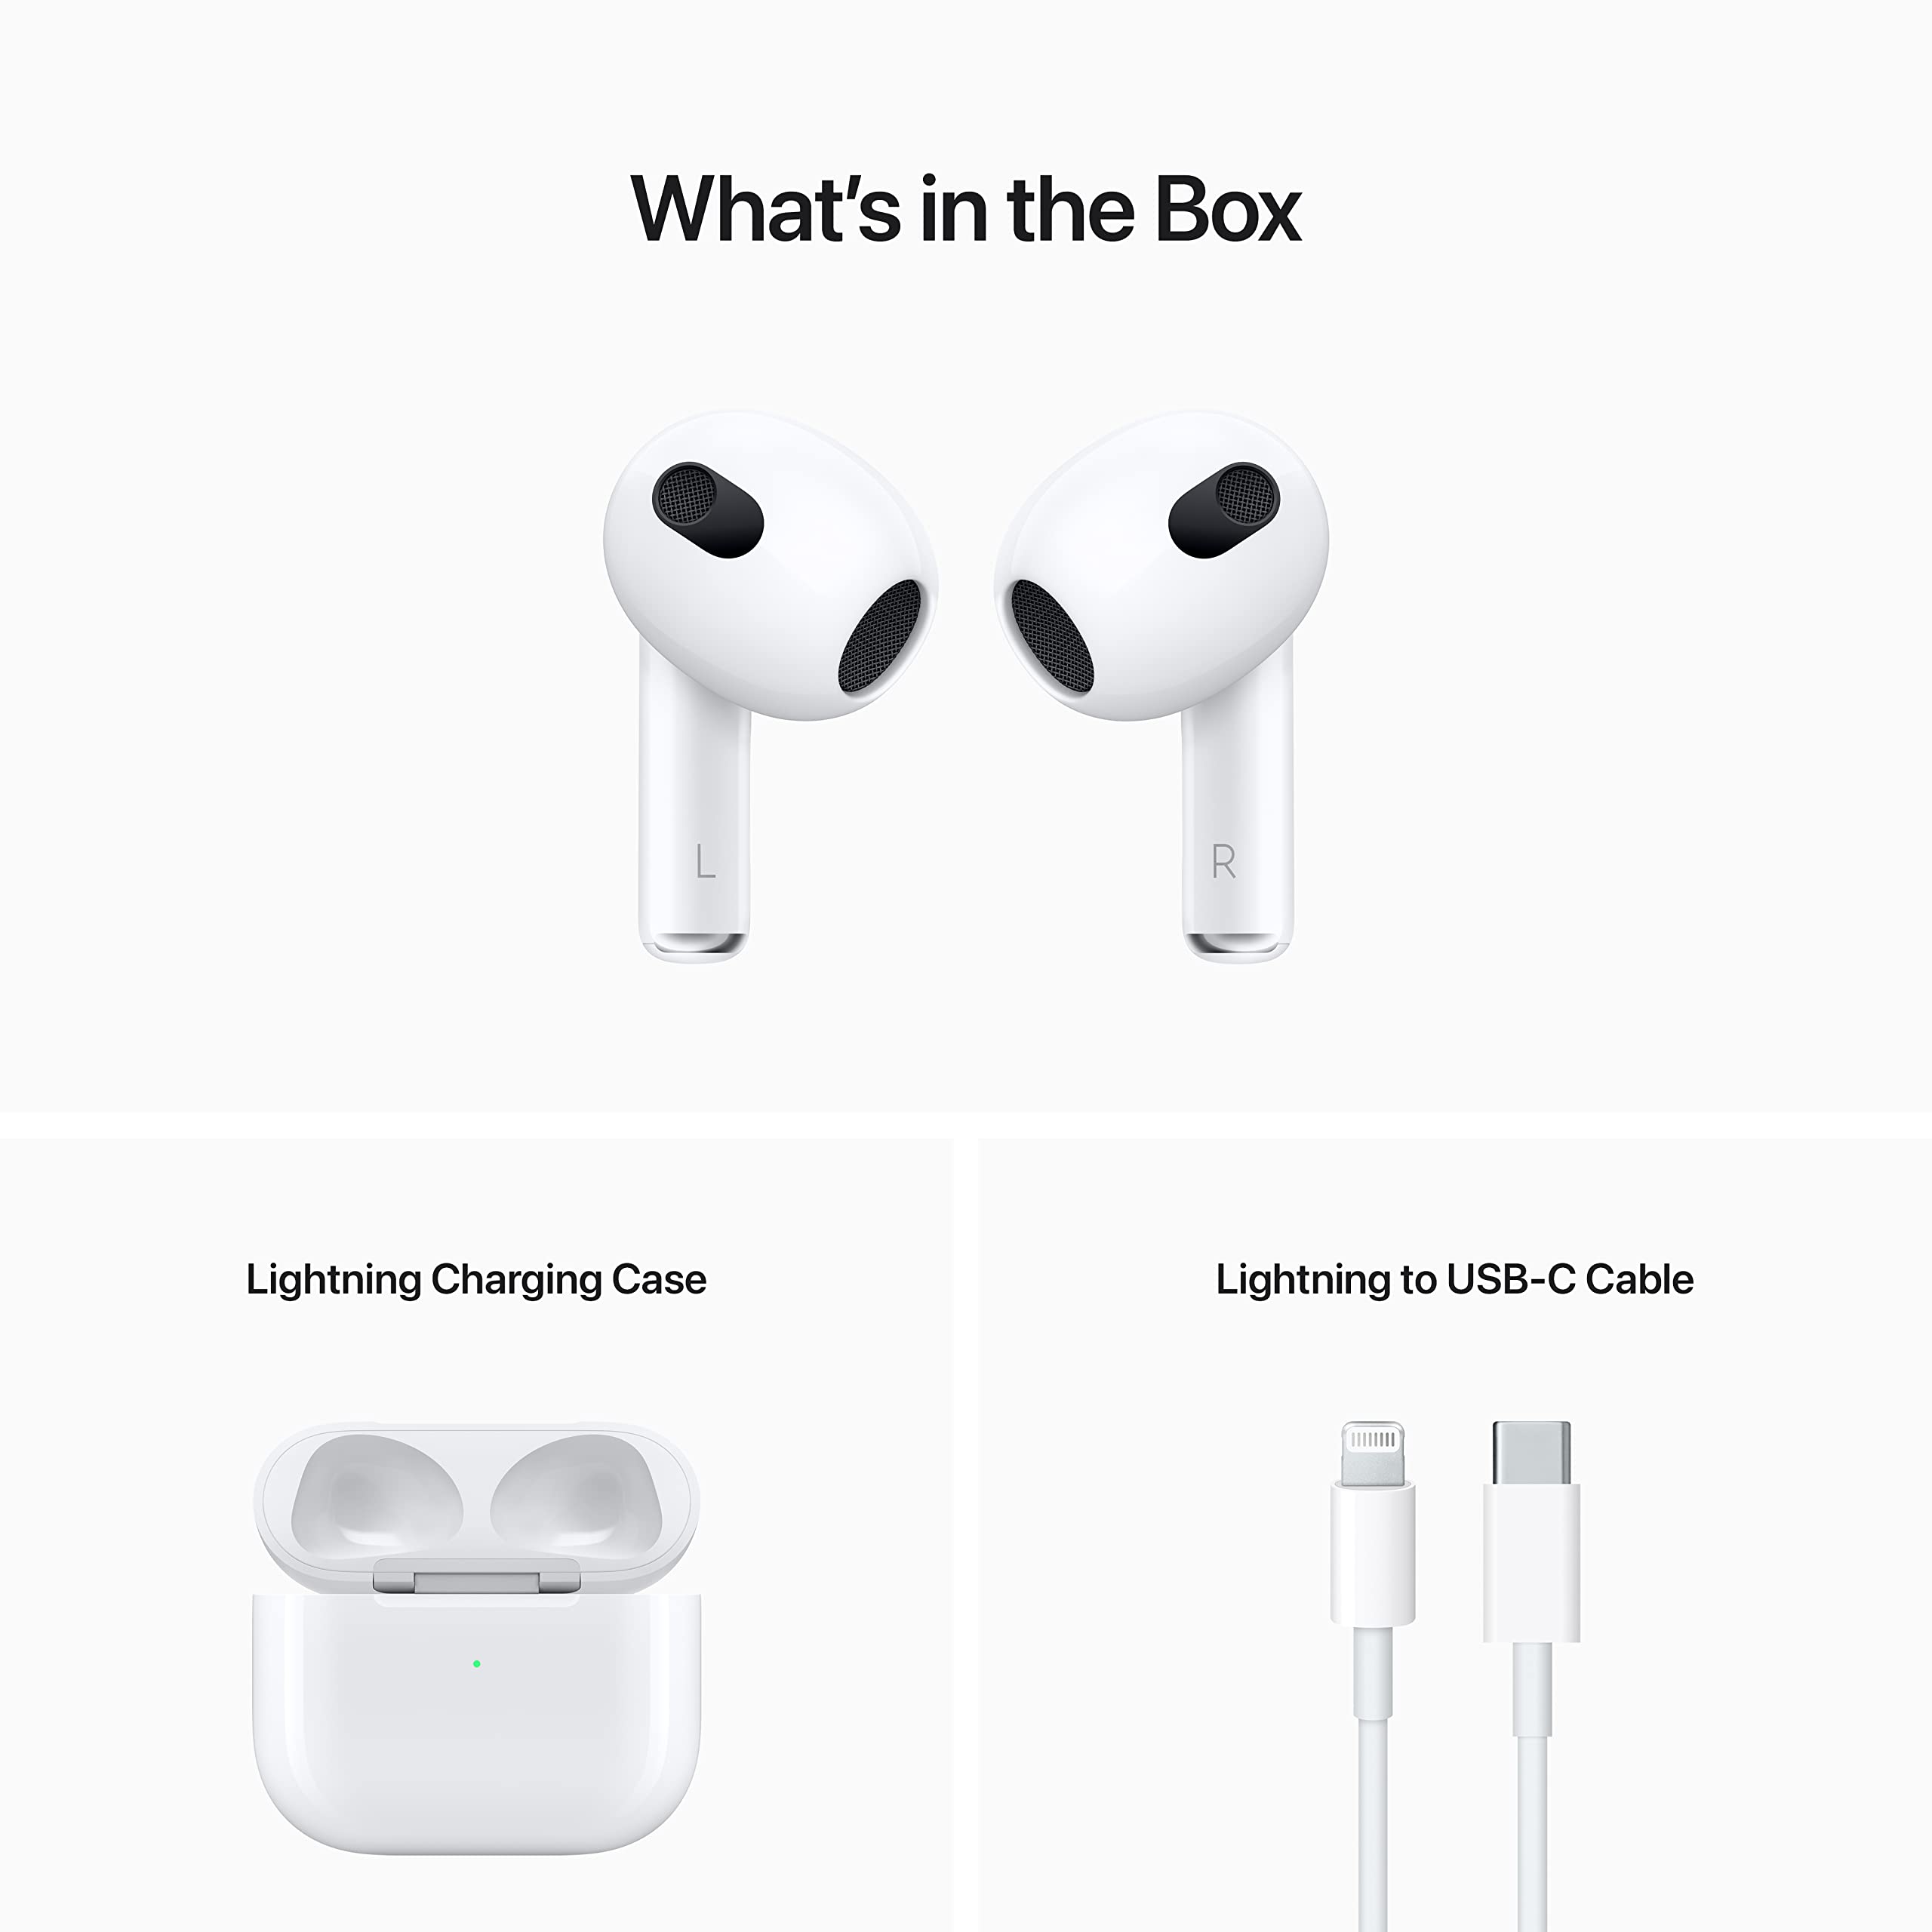 Apple AirPods (3rd Generation) Wireless Earbuds with Lightning Charging Case.  - Amazon - Prime - $139 $139.99